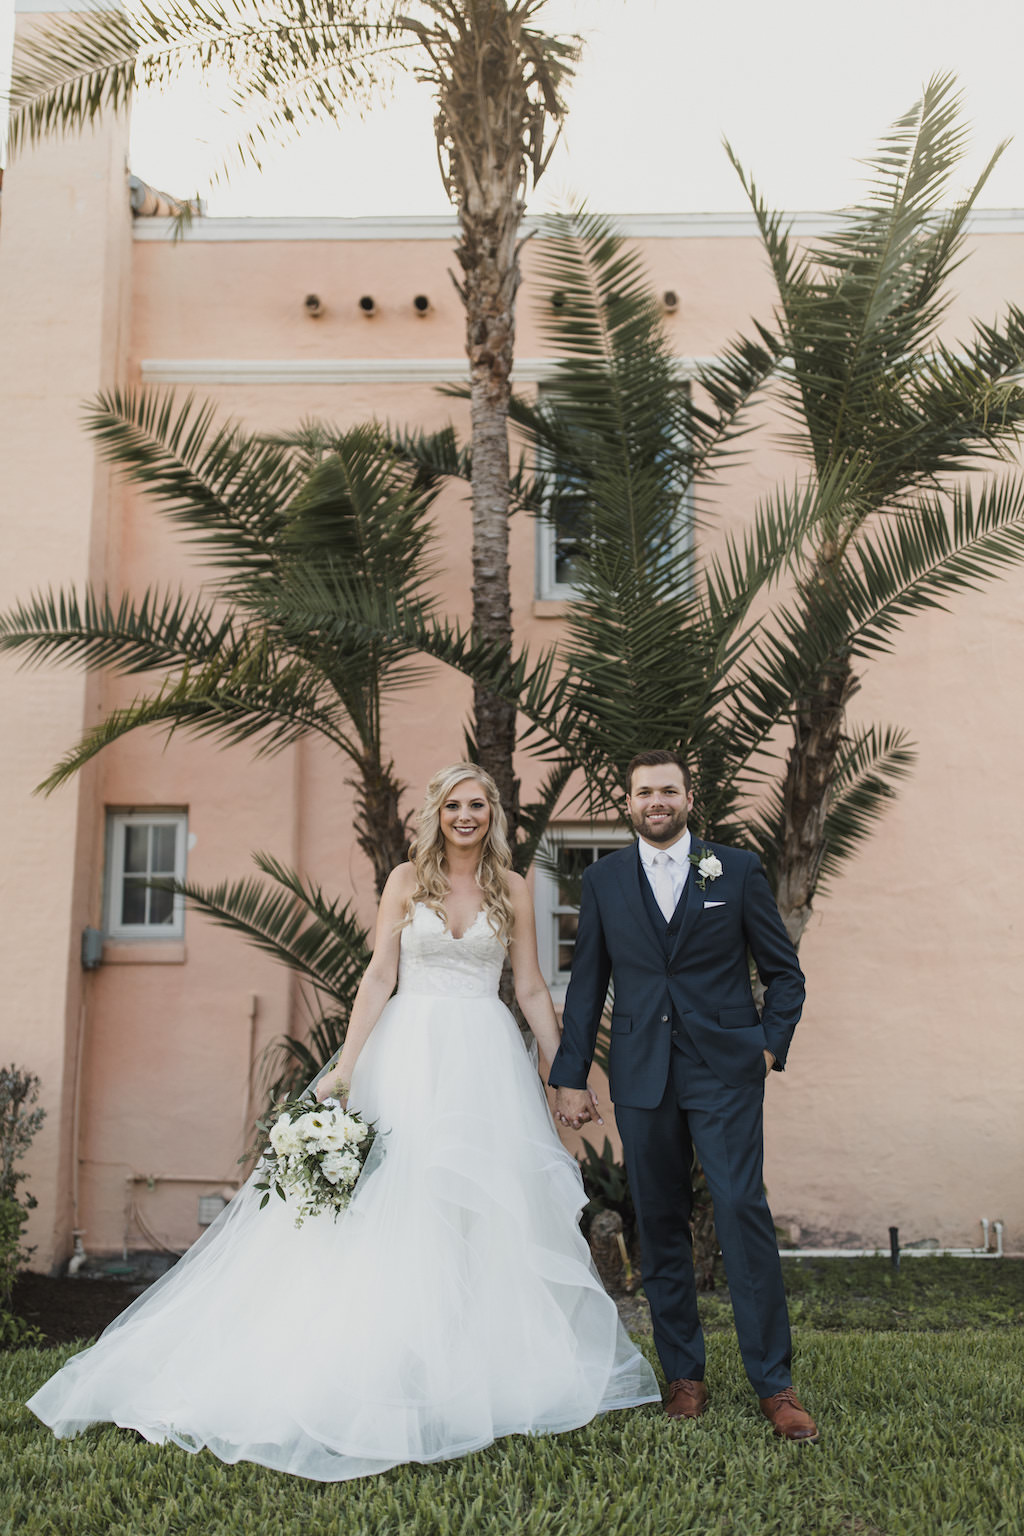 Outdoor Florida Bride and Groom Wedding Portrait, Bride in Strapless Hayley Paige Chantelle Gown, Ivory Tulle Skirt Ball Gown with Lace Corset Bodice, White and Greenery Floral Bouquet, Groom in Navy Blue Suit | Tampa Bay Wedding Hair and Makeup Artist Michele Renee the Studio